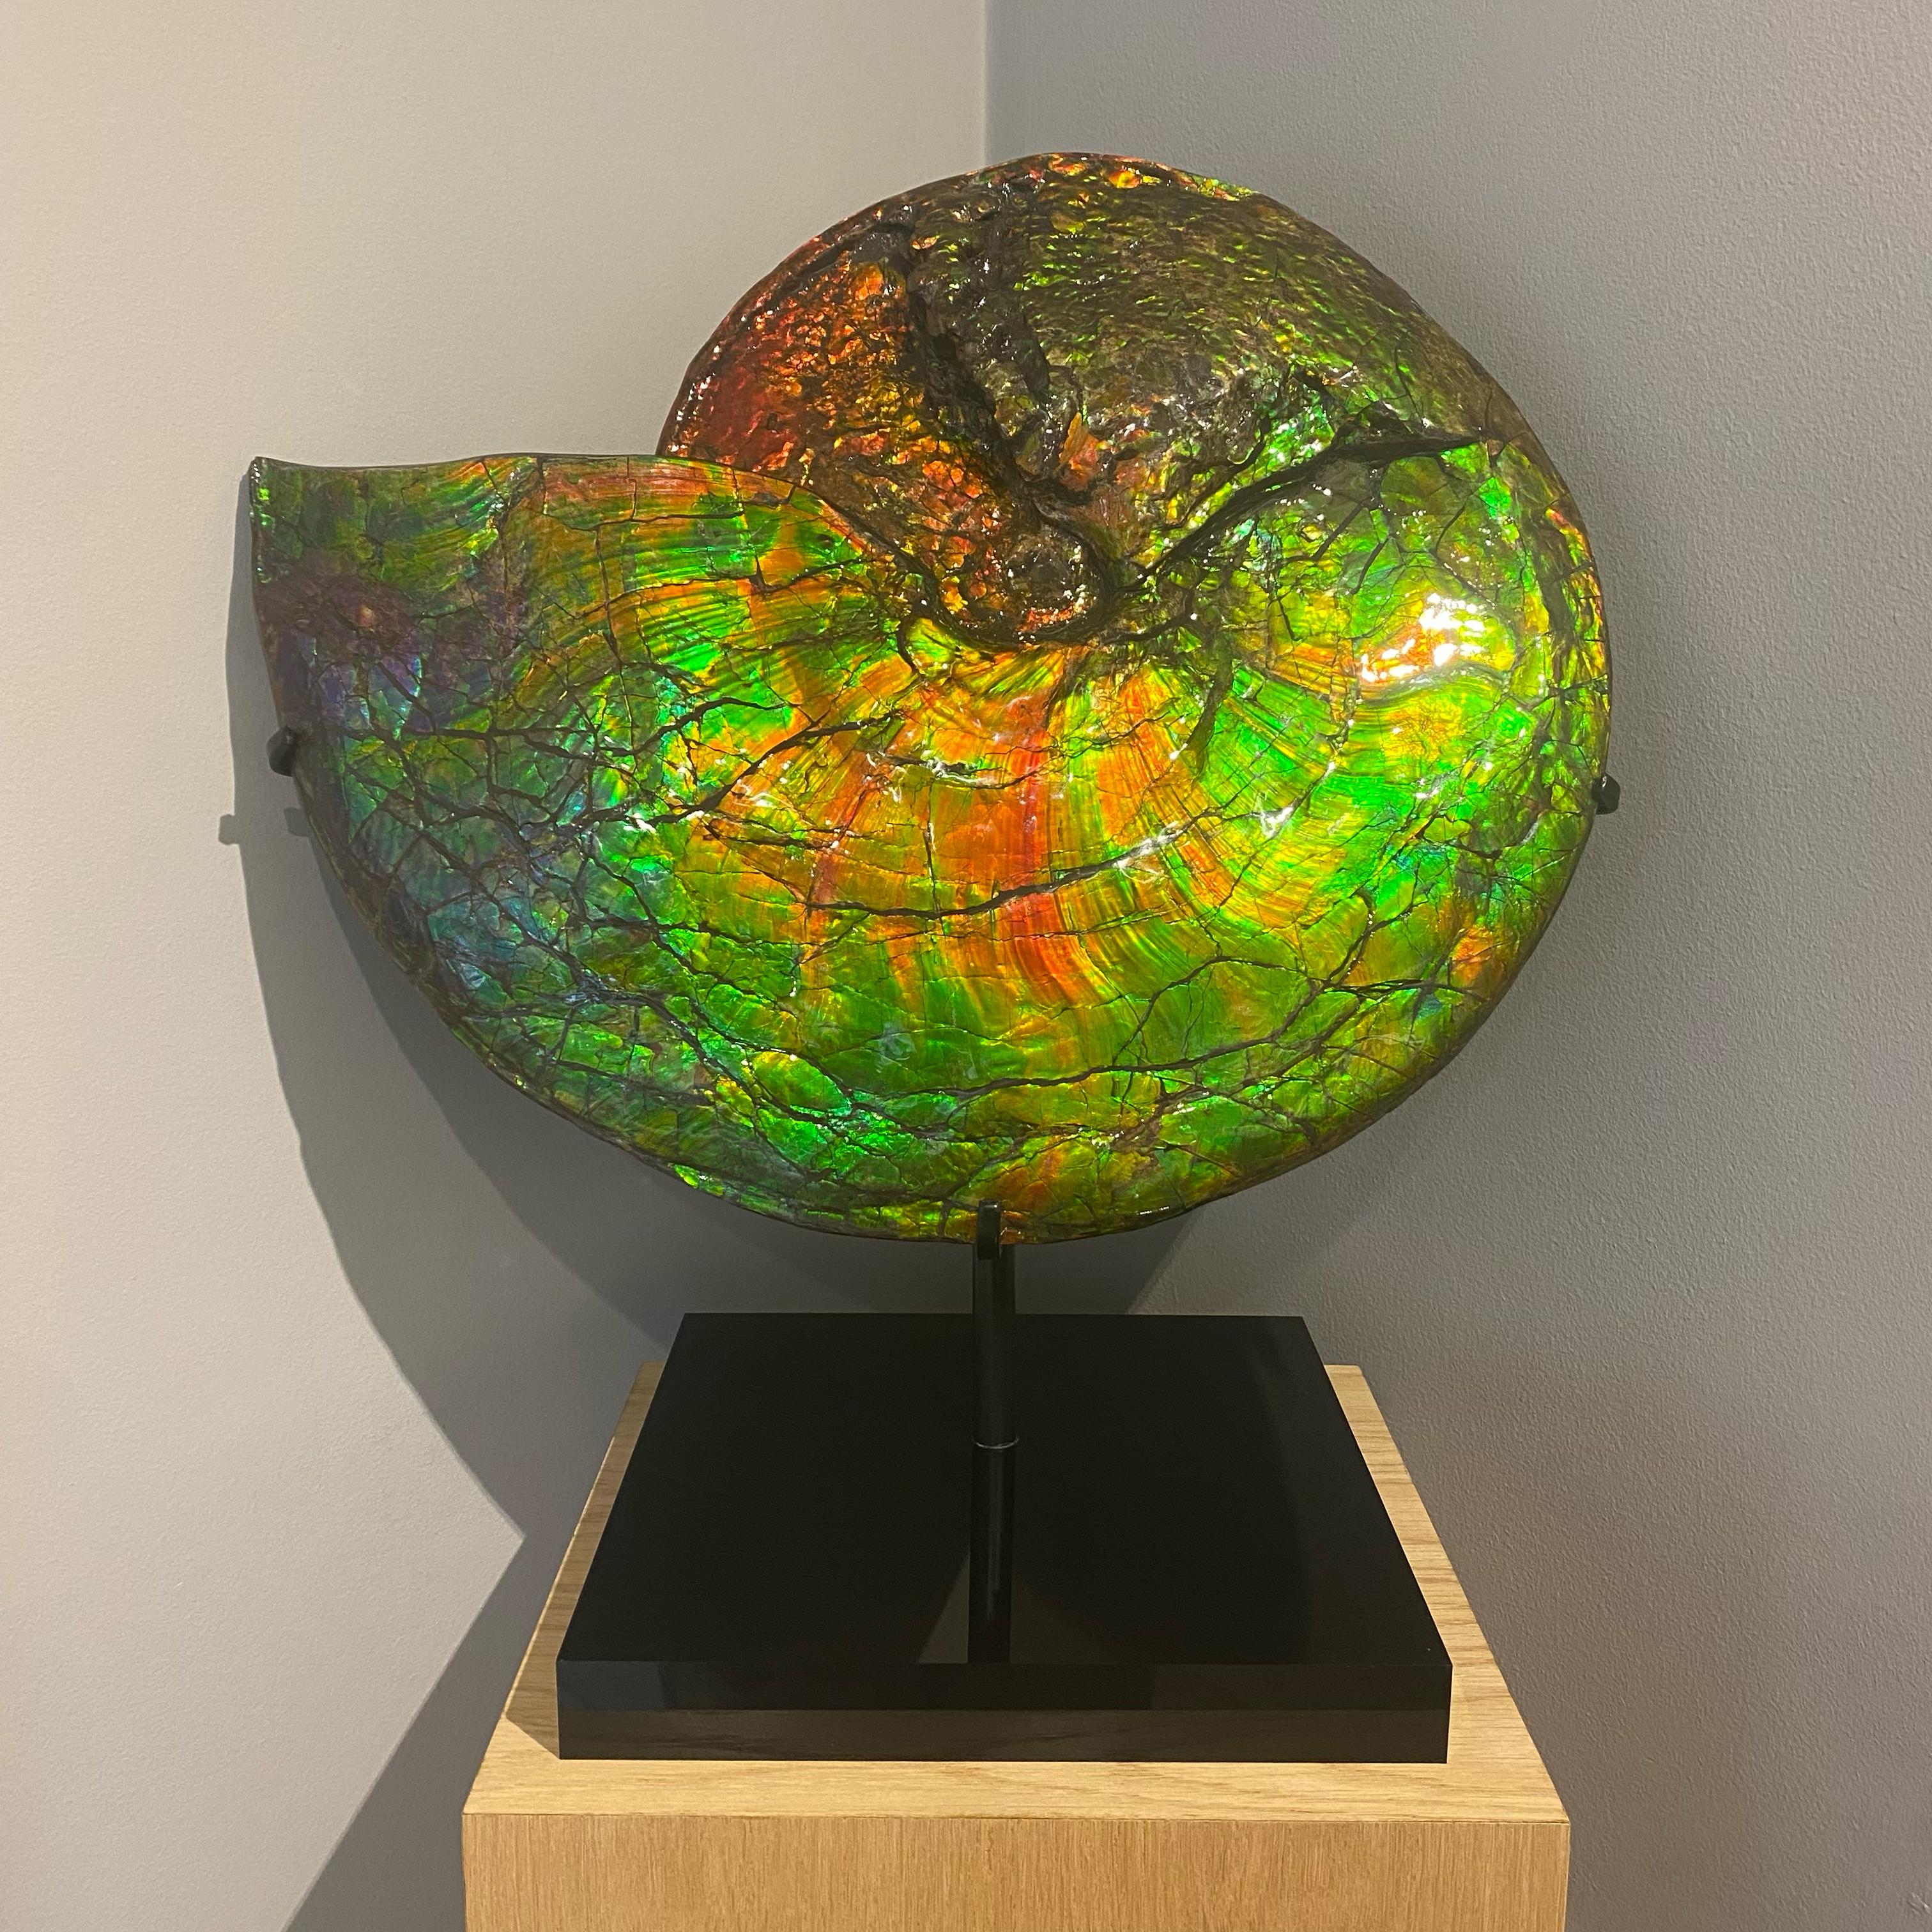 Rare Iridescent Ammonite

'Placenticeras intercalare'
Upper Cretaceous (75-72 million years ago)
Measures: 46 x 38 x 4 cm
Alberta, Canada 

Known as ‘Ammolite’, the shimmering, metallic colours were caused by the combination of millions of years of